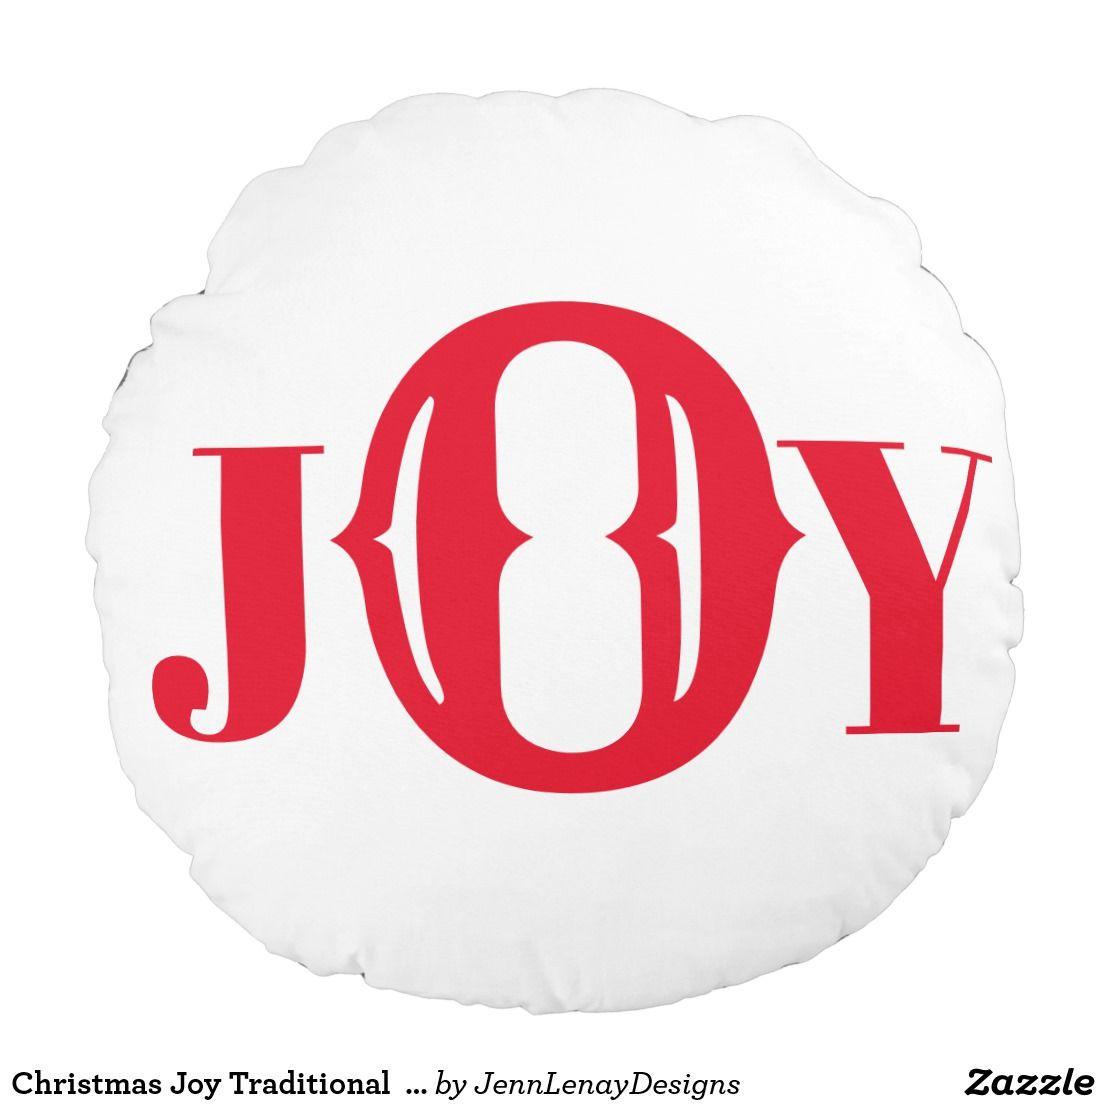 Cristmas Red White and Looking Brand Logo - Christmas Joy Traditional Red White Round Pillow. Santa Claus Holly